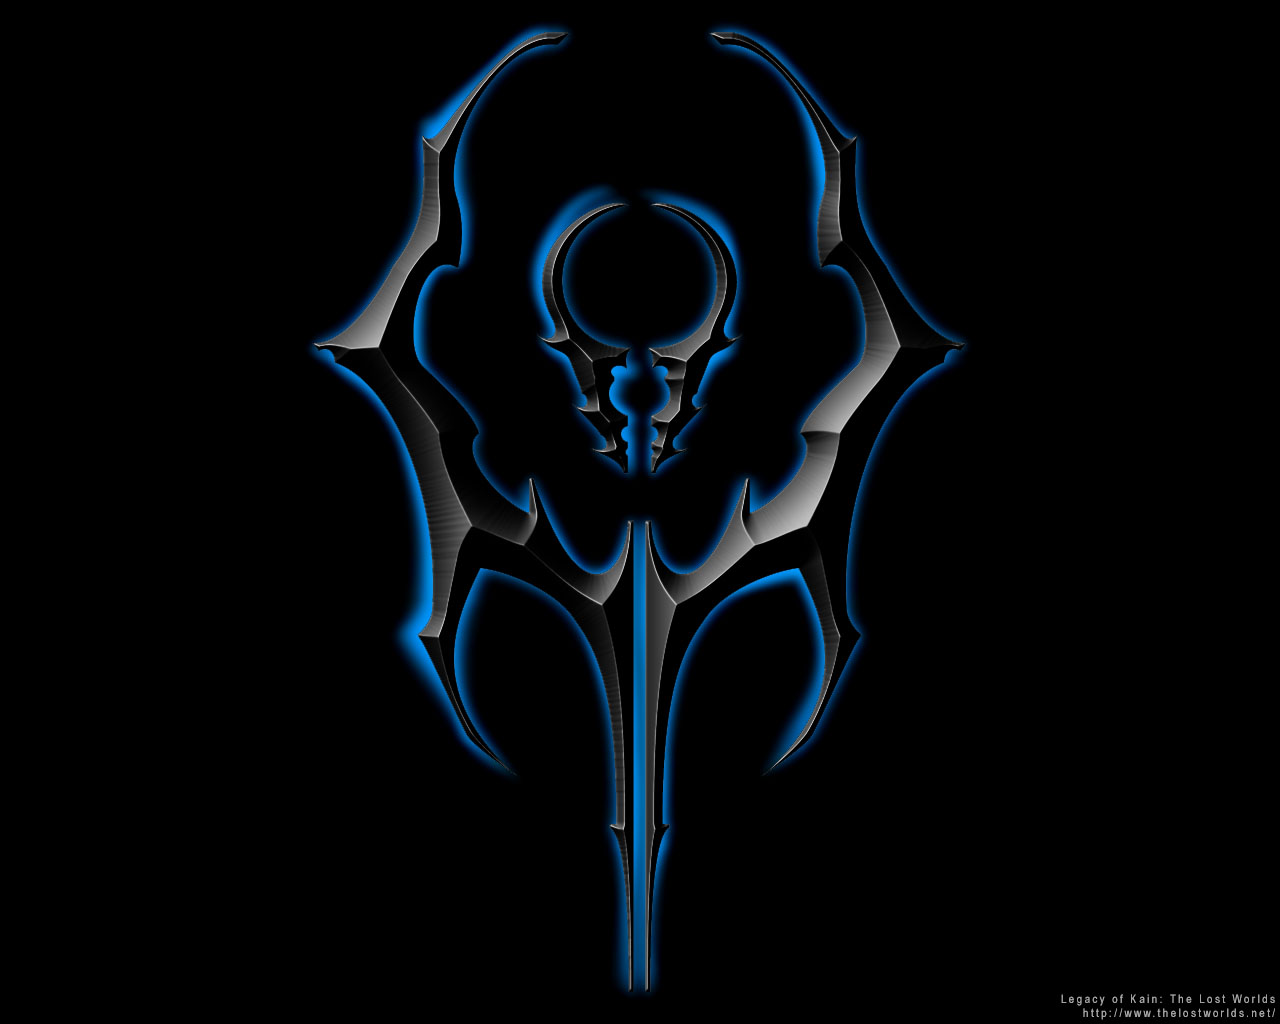 Symbols - Legacy of Kain Series - Legacy of Kain: The Lost Worlds